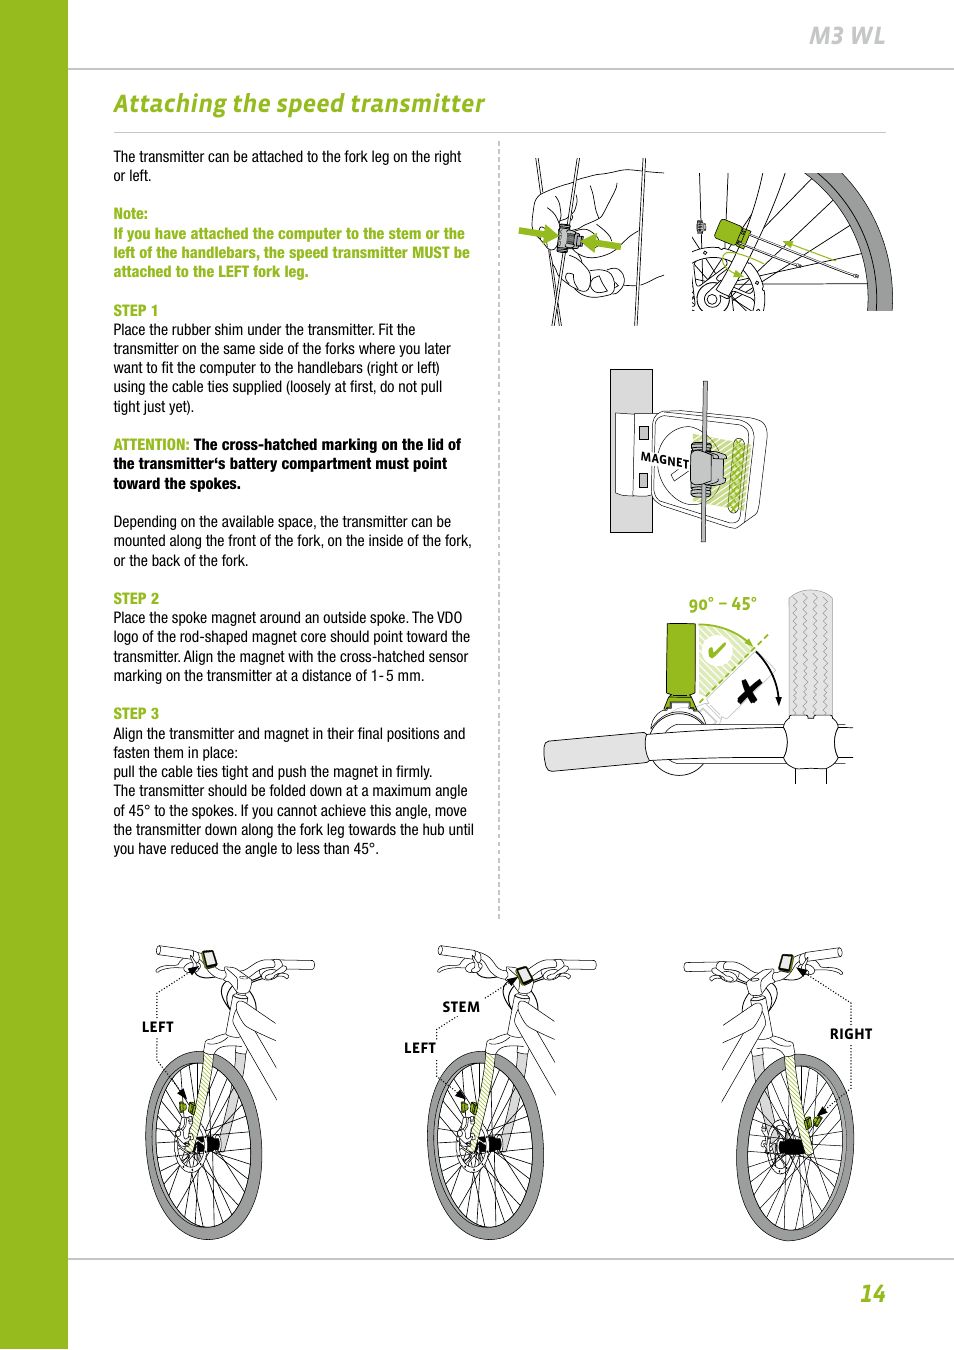 14 m3 wl, Attaching the speed transmitter | VDO M3WL User Manual | Page 14 / 41